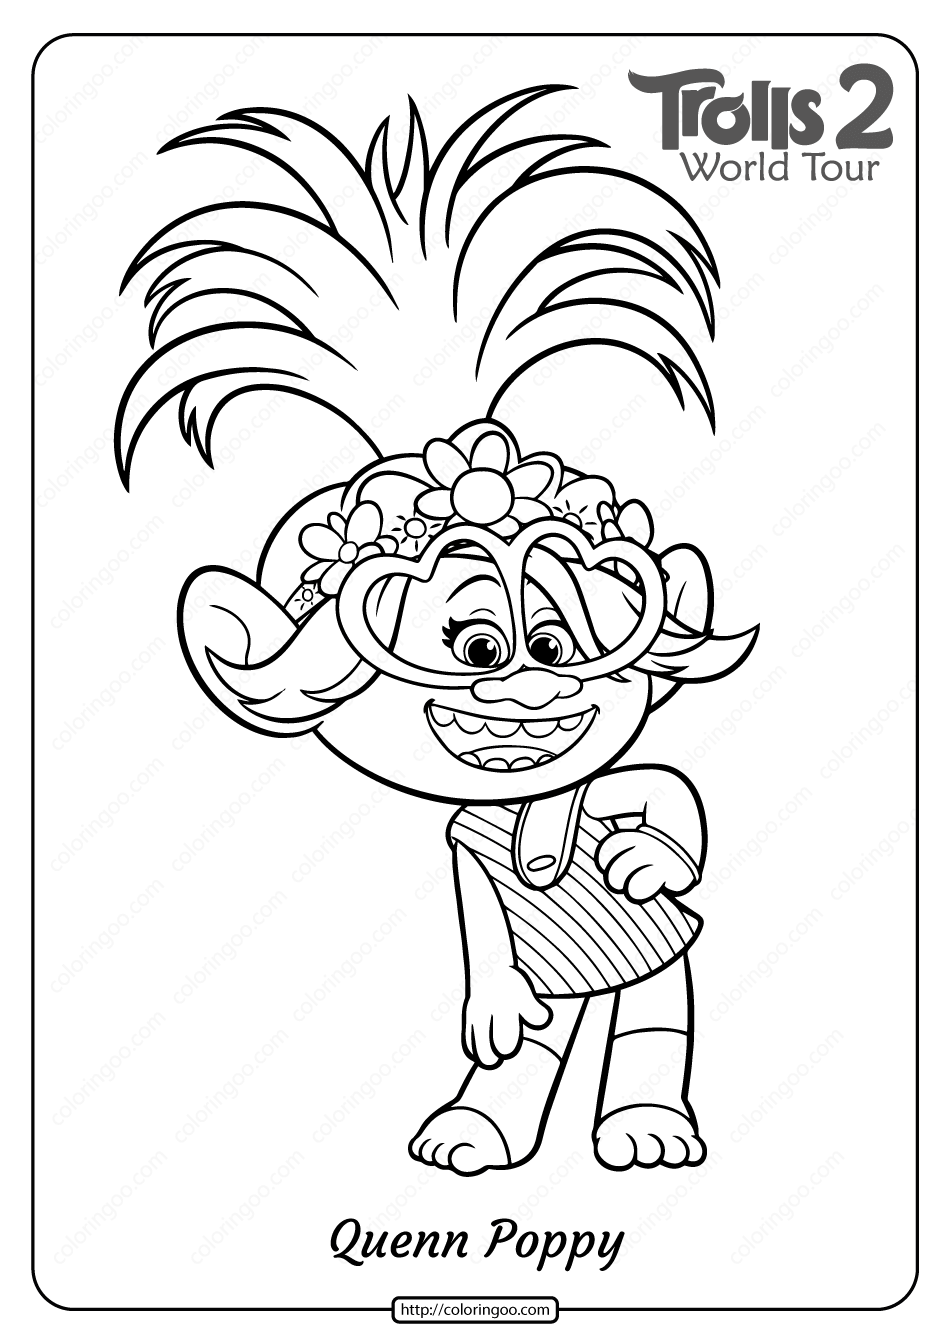 Free Printable Trolls 2 Queen Poppy Coloring Page Poppy Coloring Page Monster Coloring Pages Coloring Pages